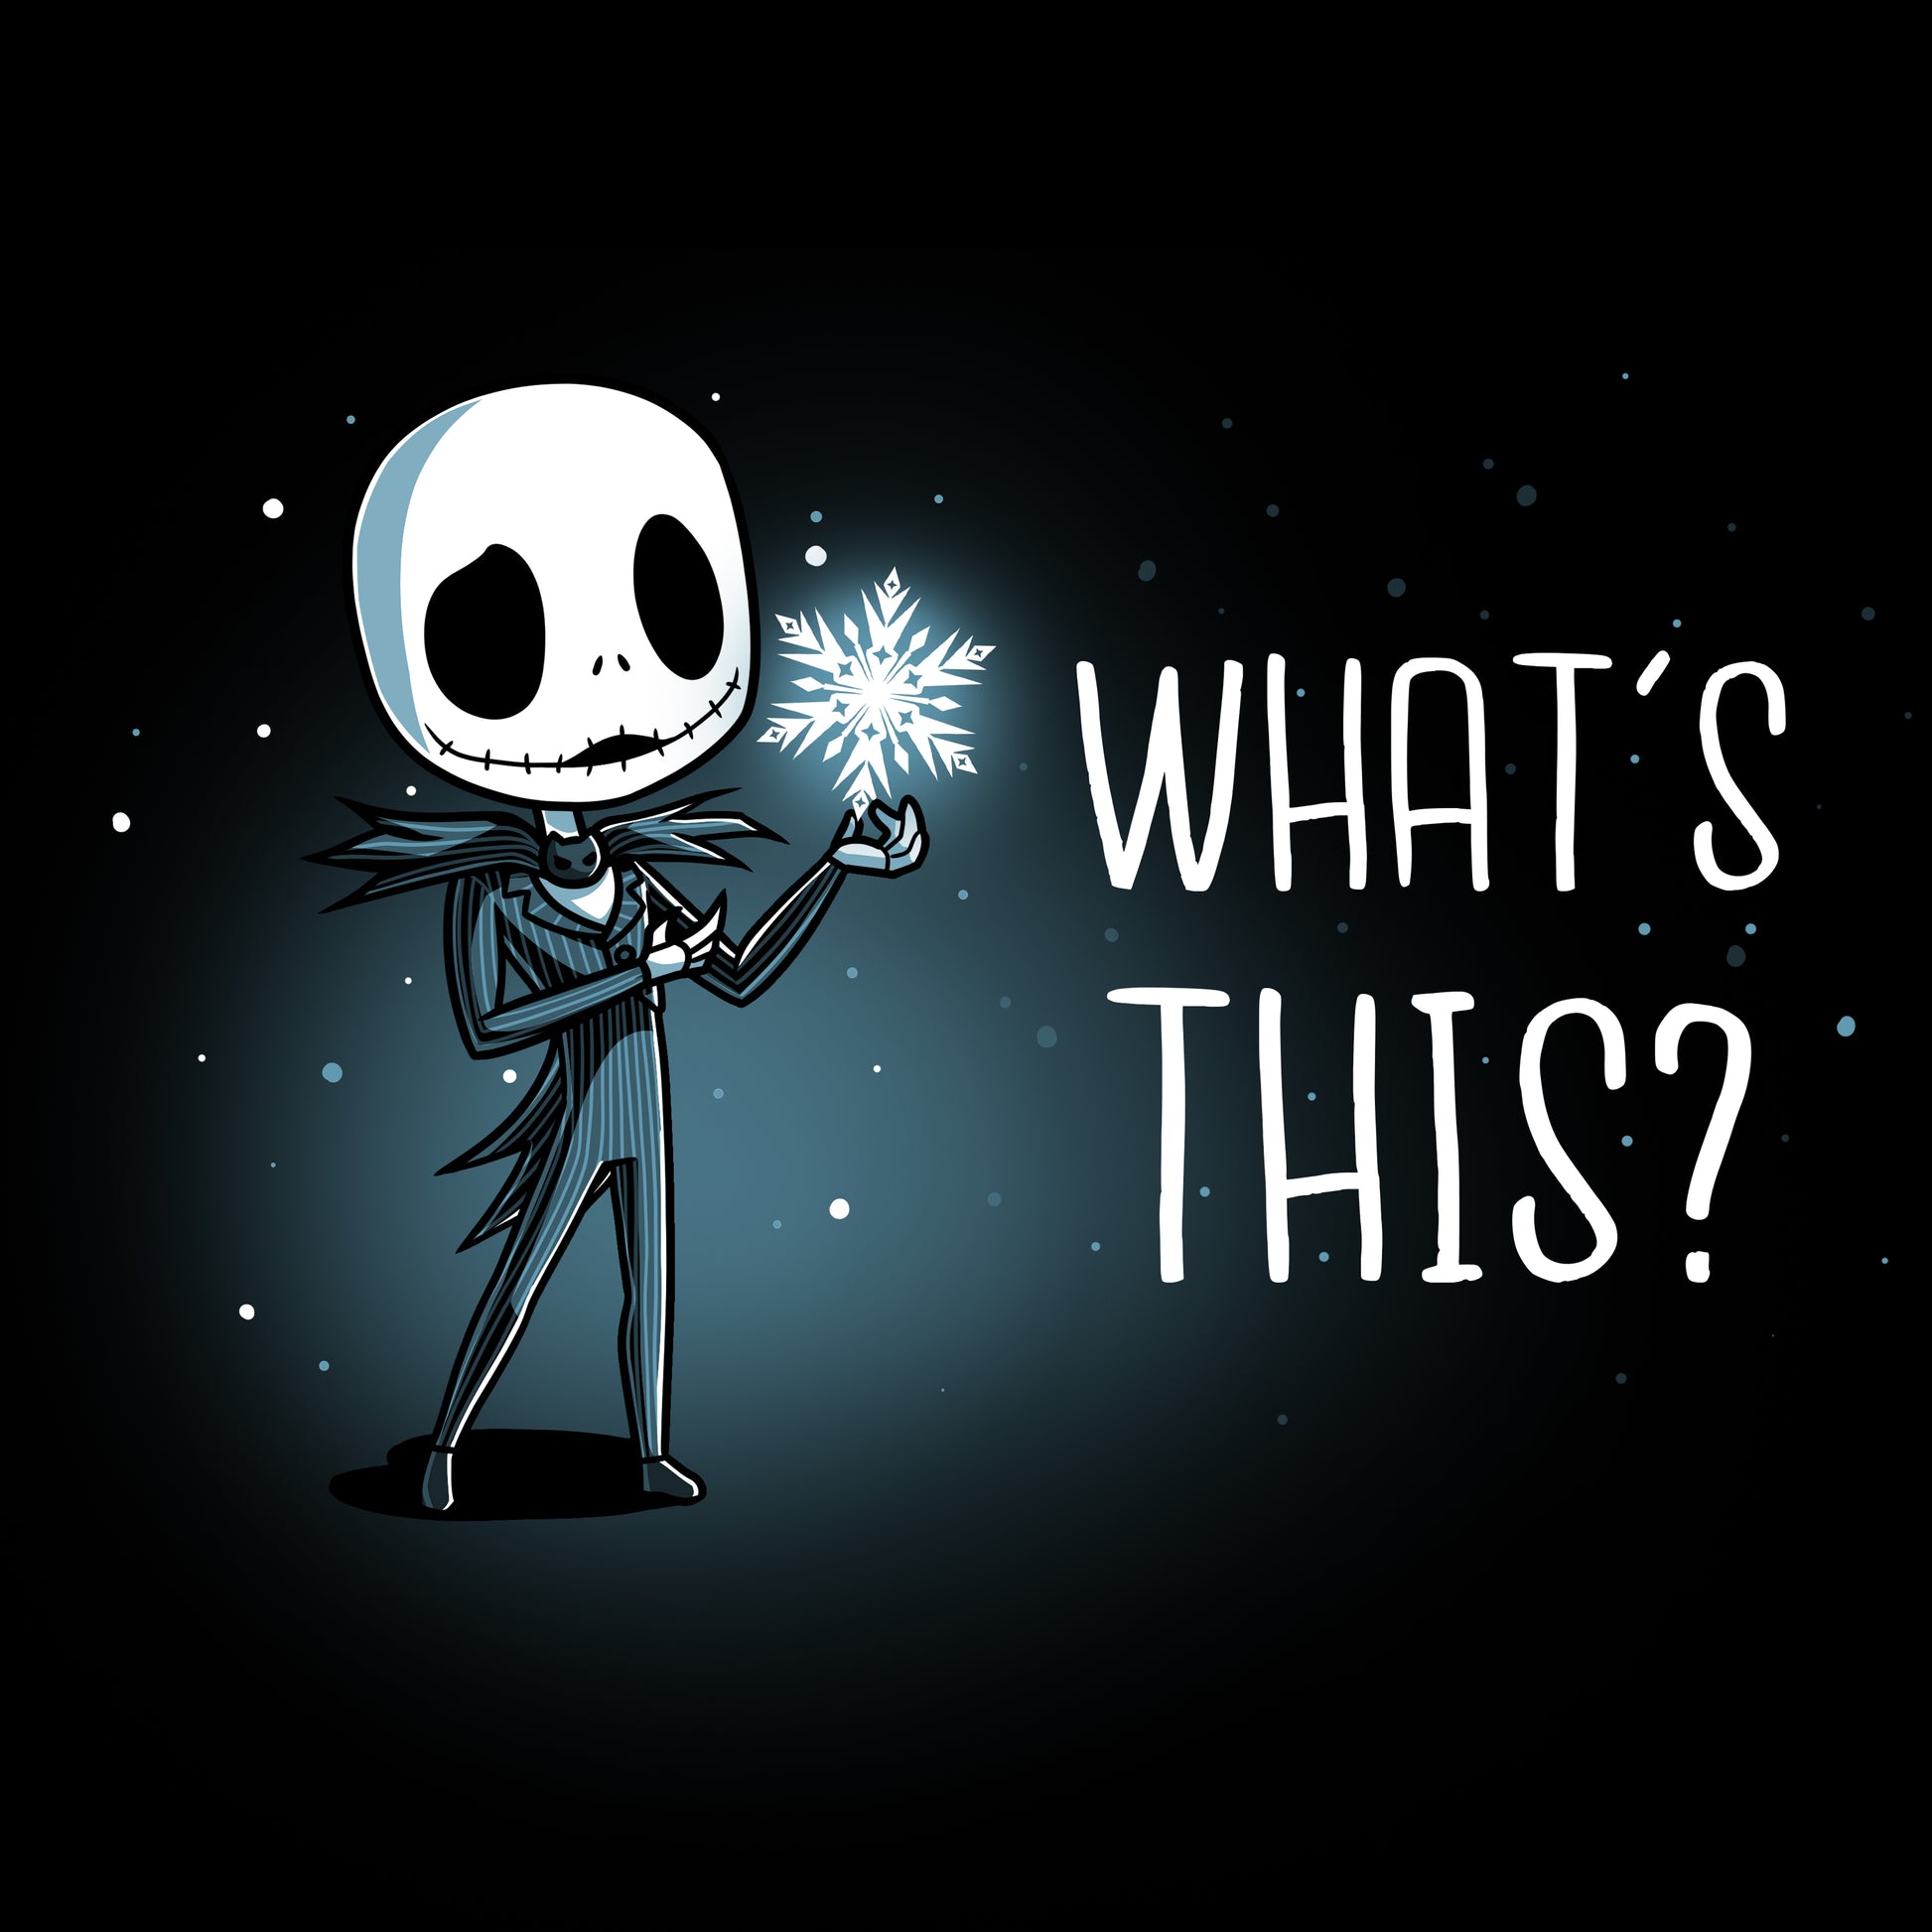 Jack Skellington, the beloved Disney character, is seen holding a snowflake with the words "What's This?". This officially licensed skeleton figure captures the whimsical and curious nature of The Nightmare Before Christmas.